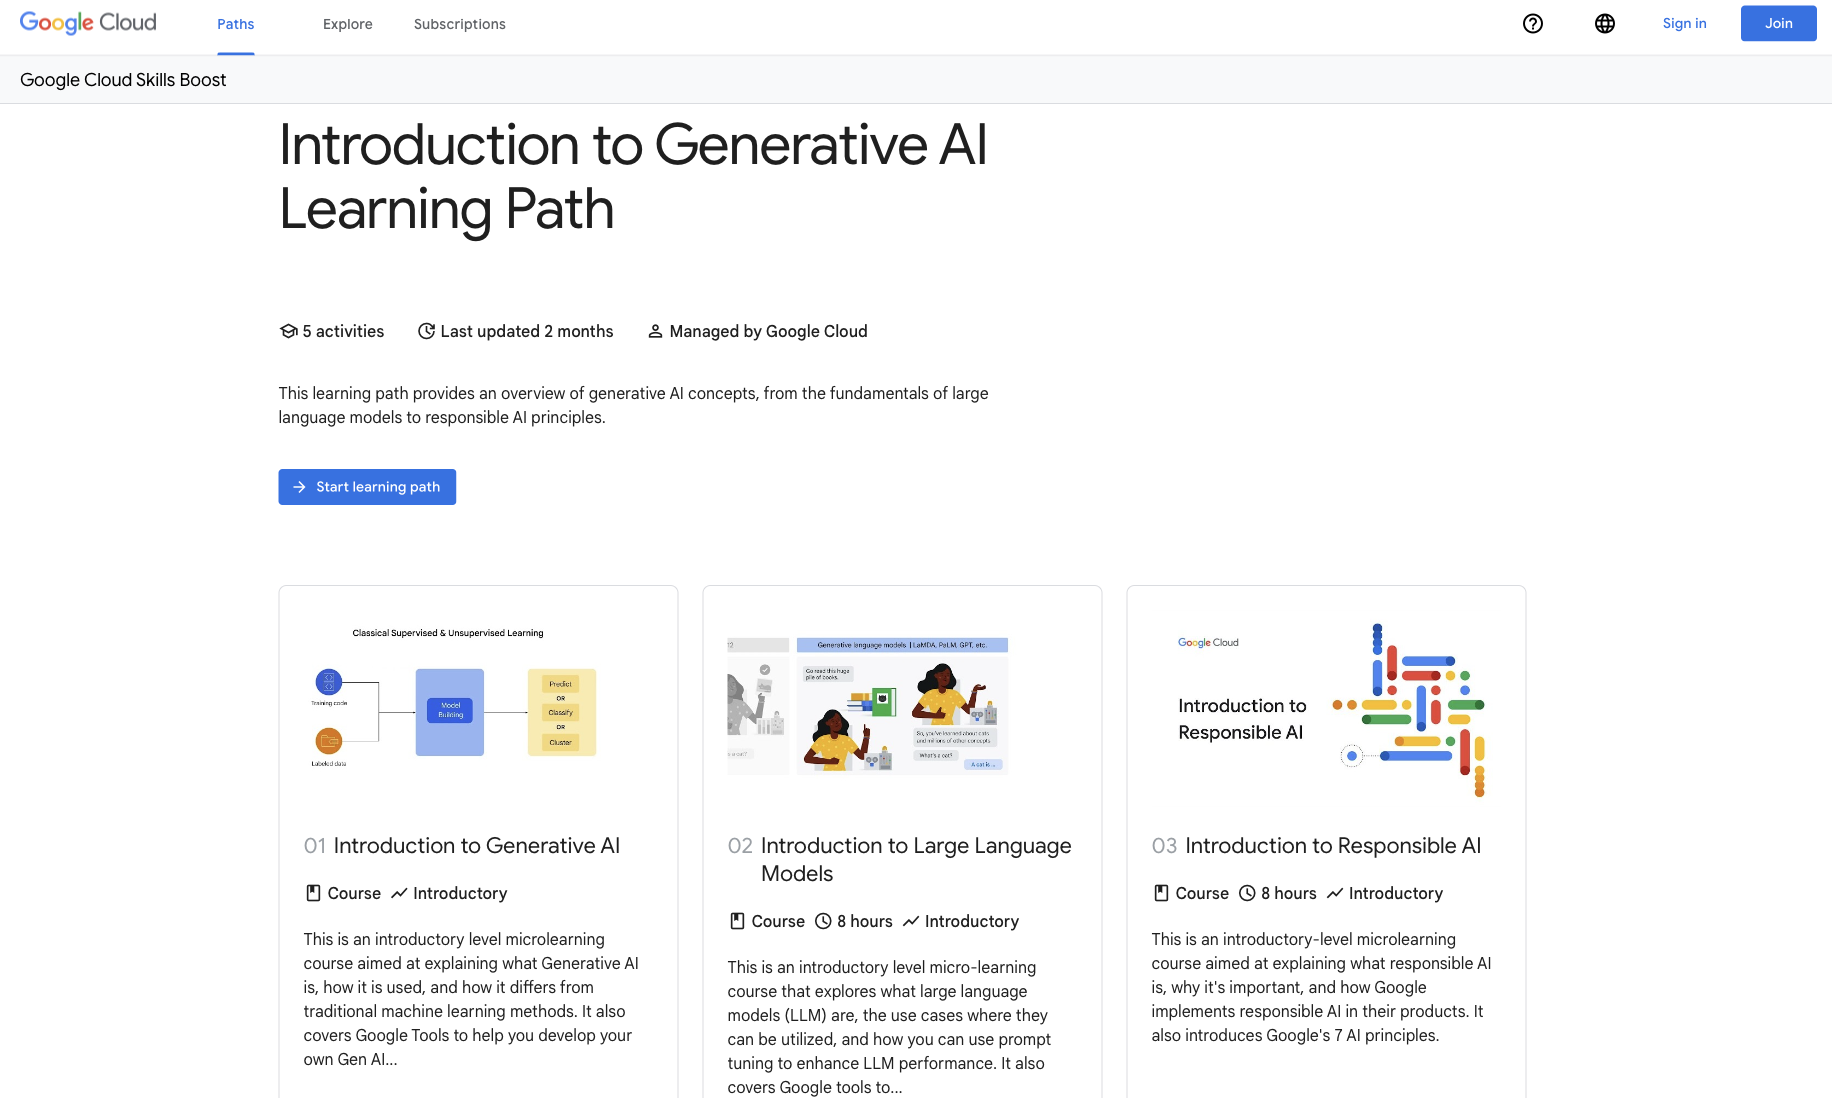 Introduction to Generative AI Learning Path